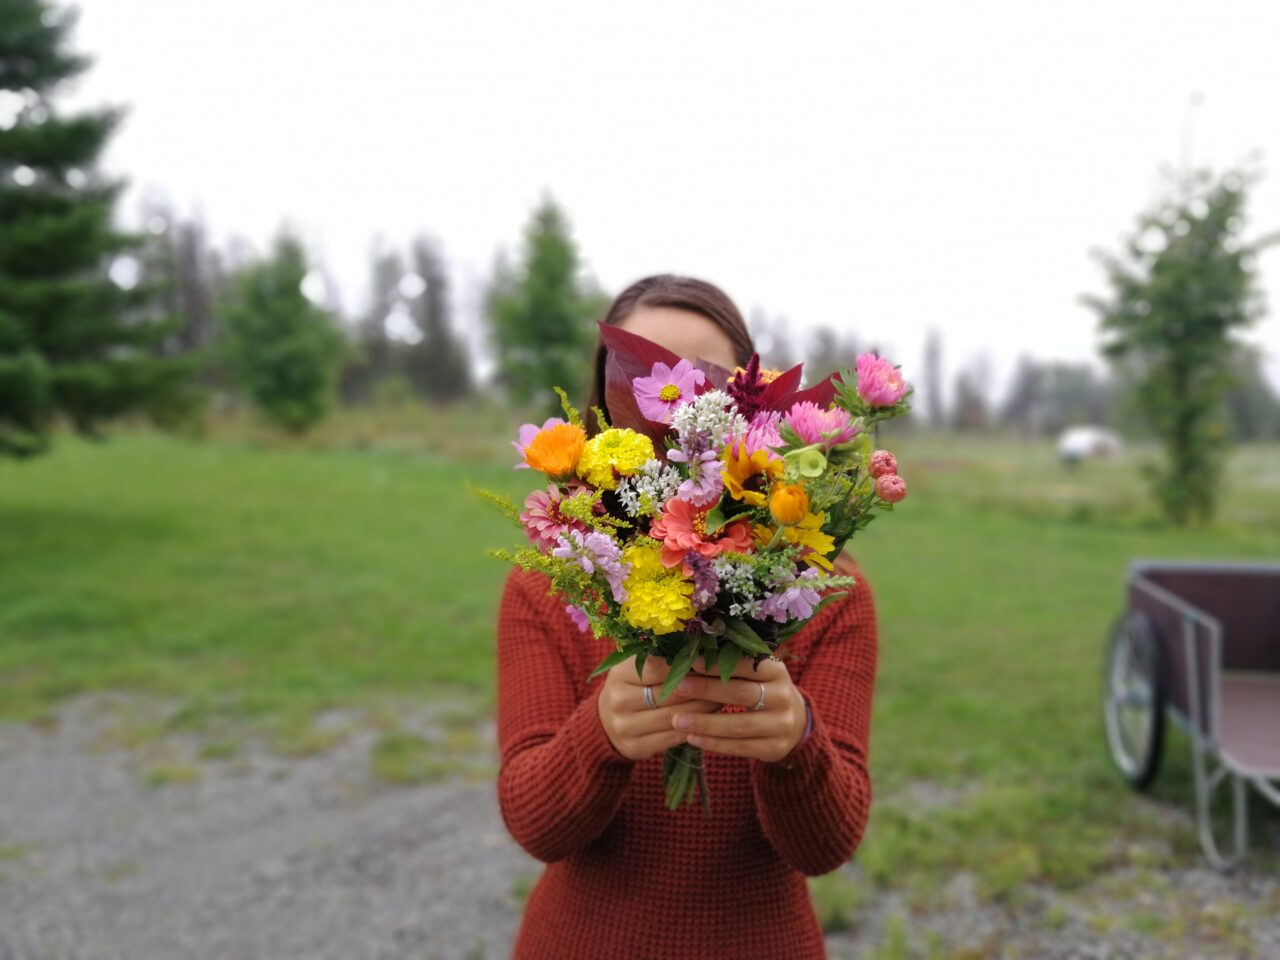 Person in red sweater holding a bouquet of flowers in front of their face. Green grass in background